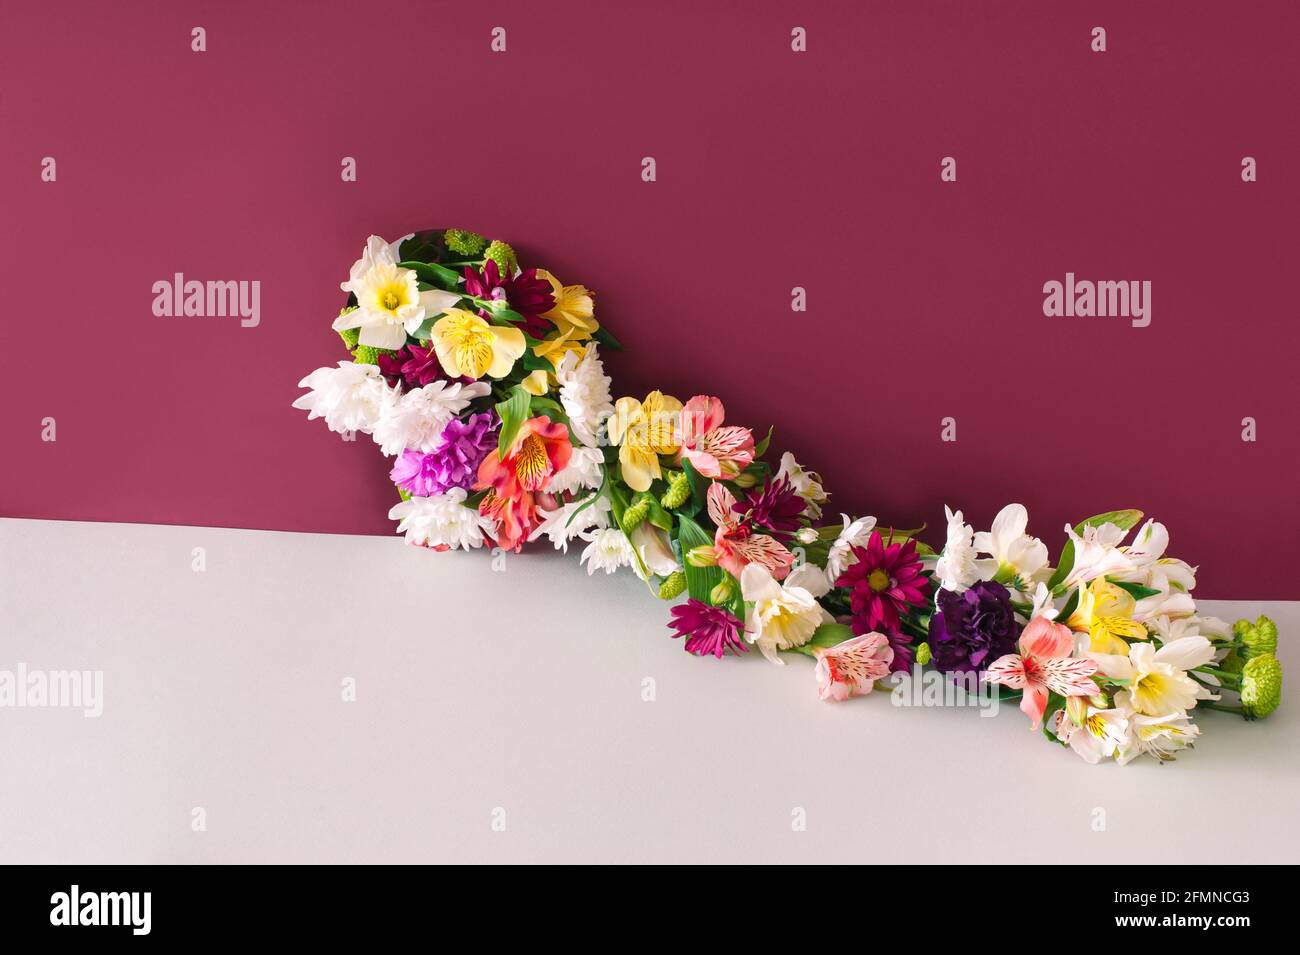 Creative layout with colorful flowers from the hole over beige background.  Concept of taking what you need in minimal style. Stock Photo